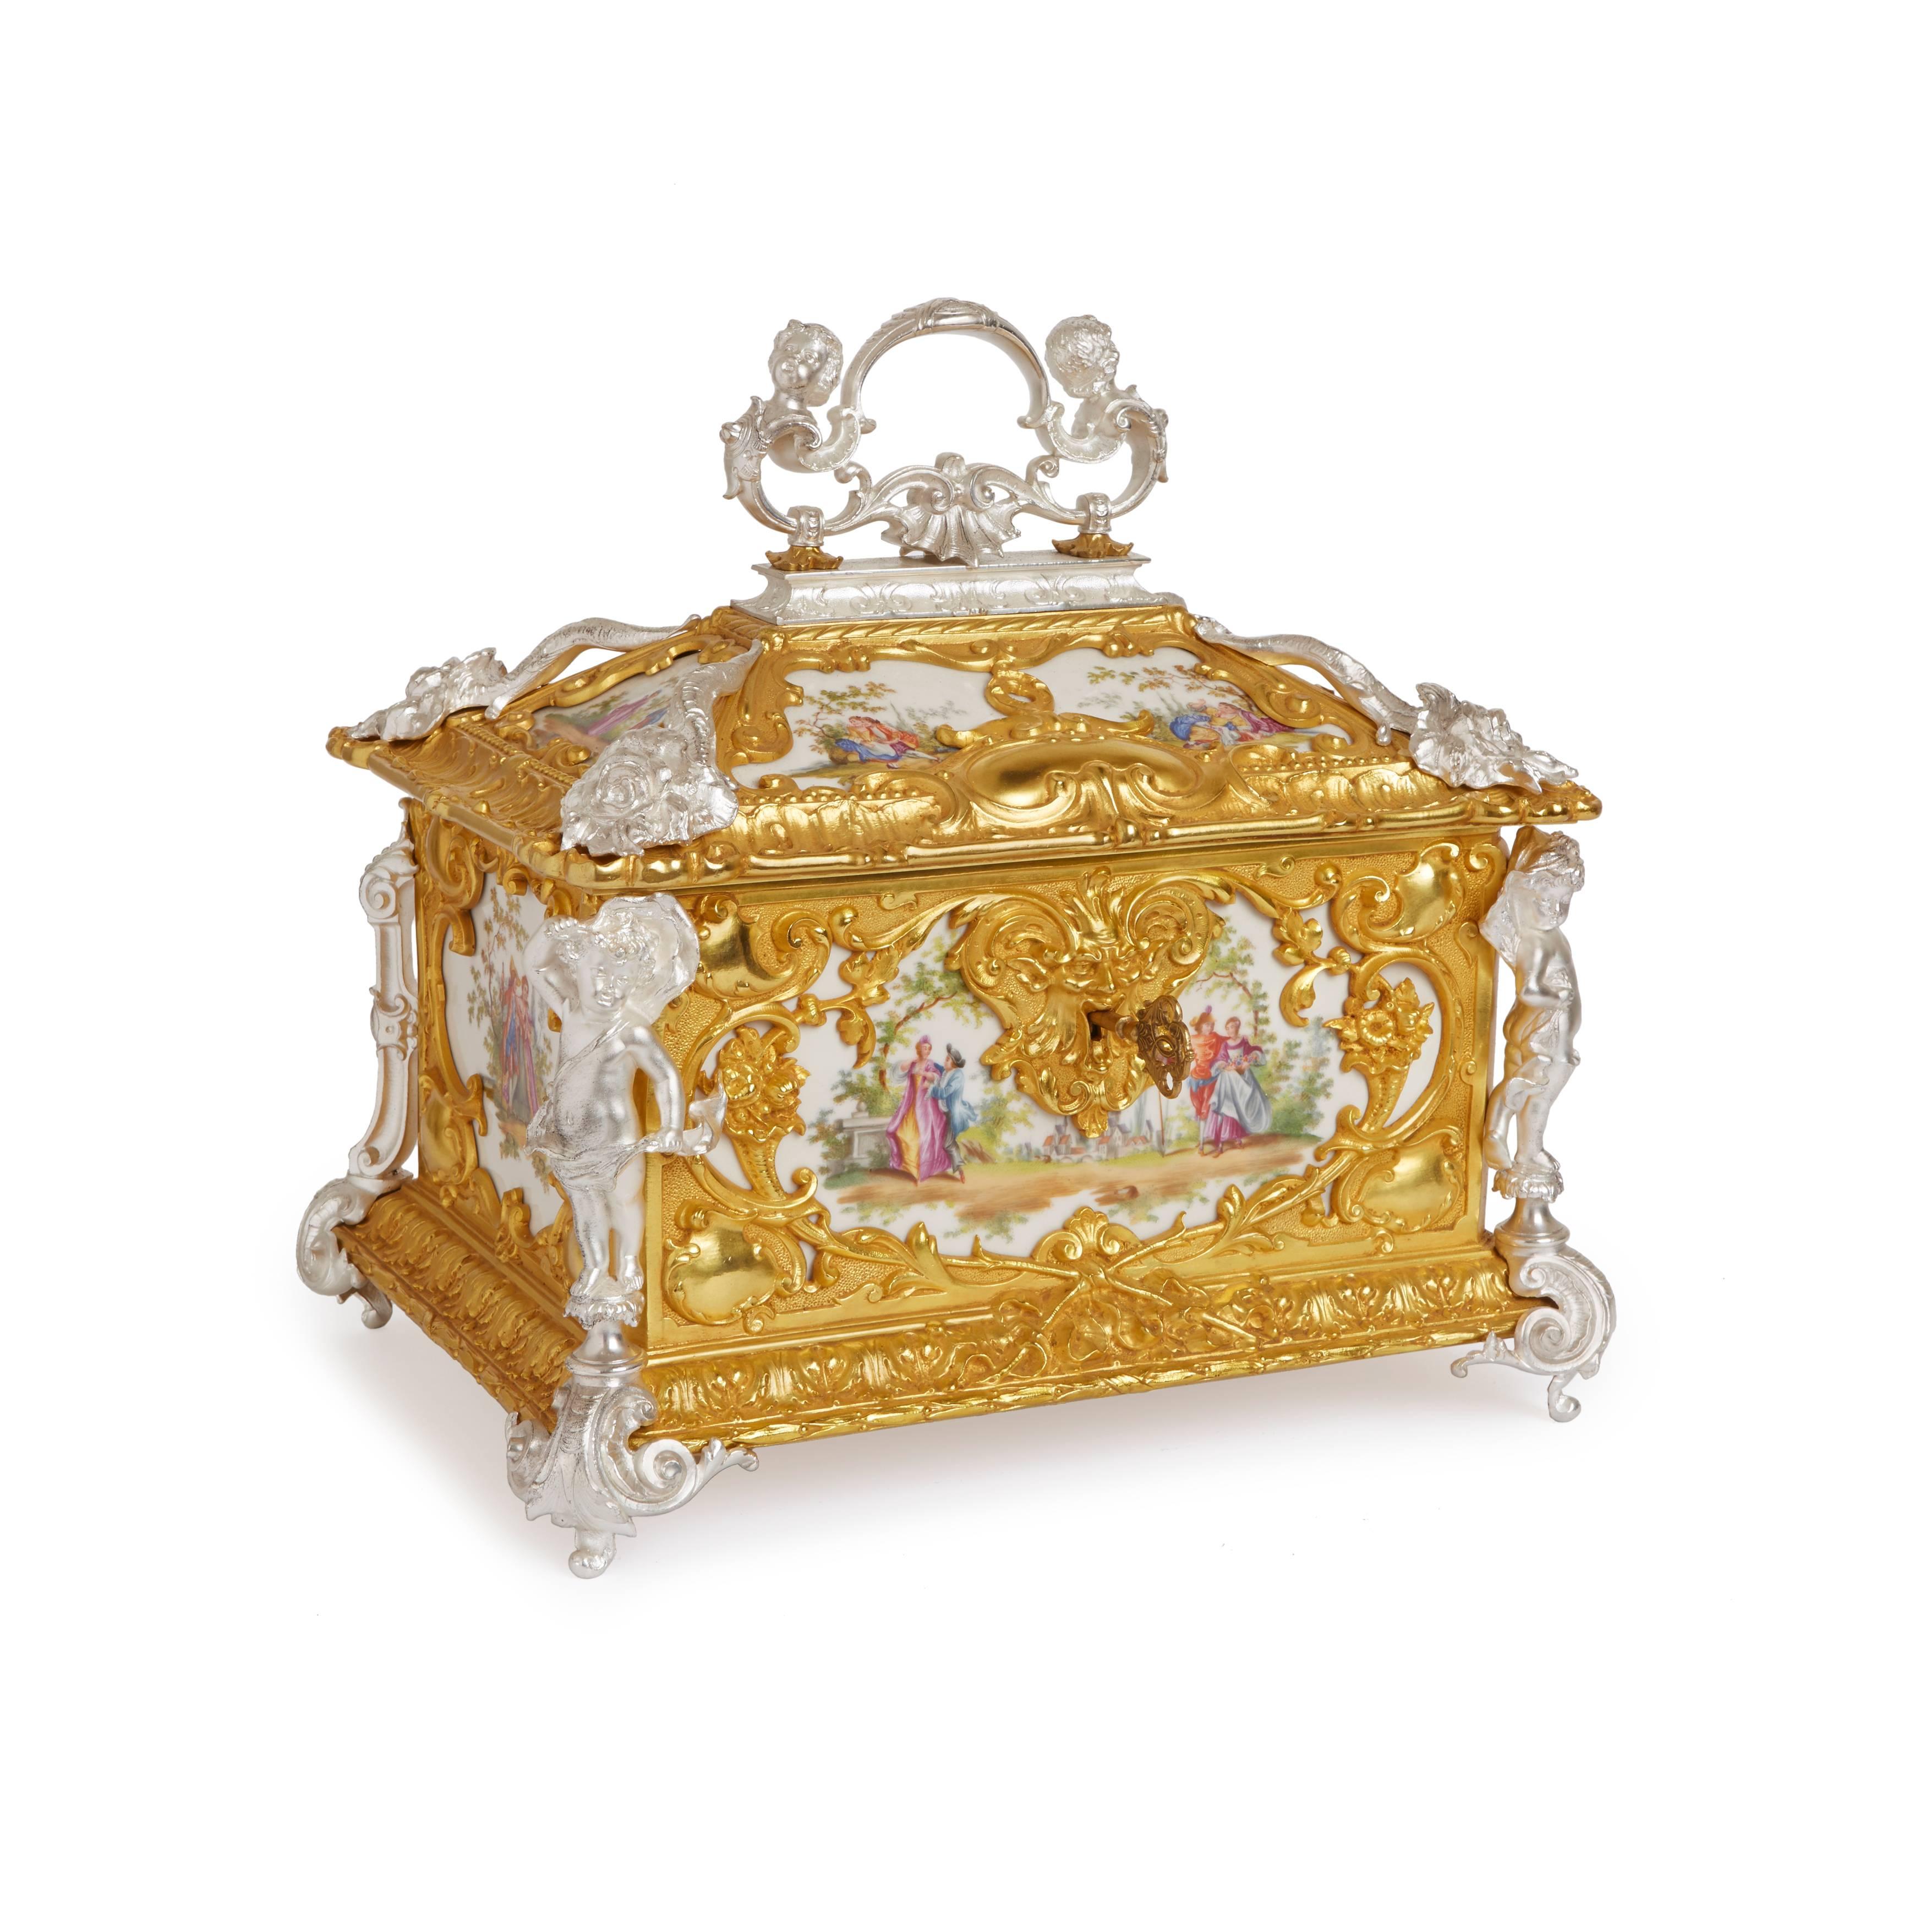 Of rectangular form, the porcelain plaques depicting amorous couples mounted with rich gilt and silvered bronze corner mounts with scrolls, cornucopias, bows, and a grotesque mask escutcheon, the hinged cover topped with a silvered bronze cherub